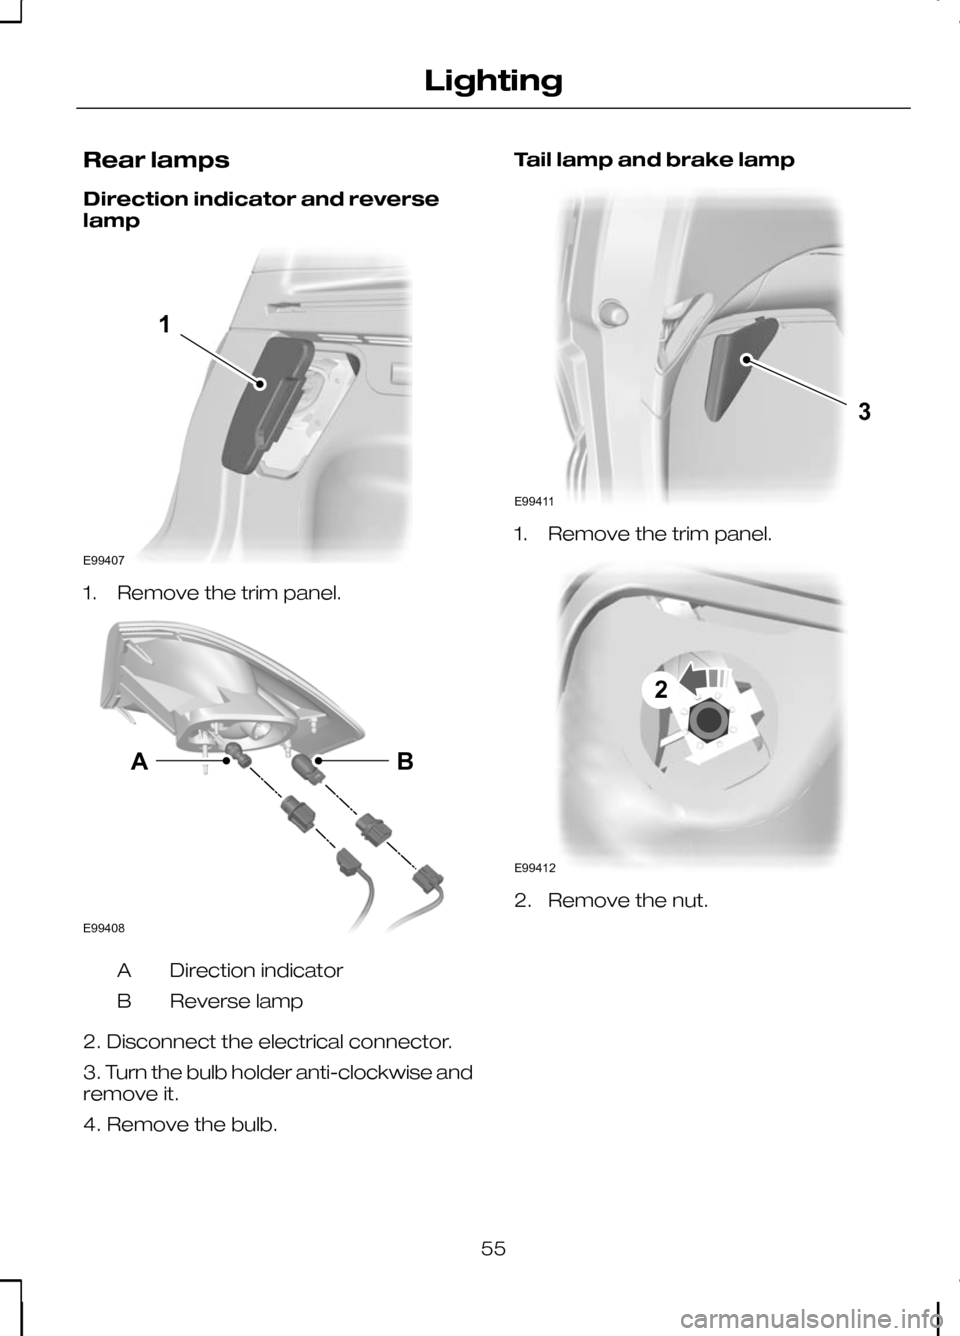 FORD KUGA 2010 1.G Owners Manual Rear lamps
Direction indicator and reverse
lamp
1. Remove the trim panel.
Direction indicator
A
Reverse lamp
B
2. Disconnect the electrical connector.
3. Turn the bulb holder anti-clockwise and
remove